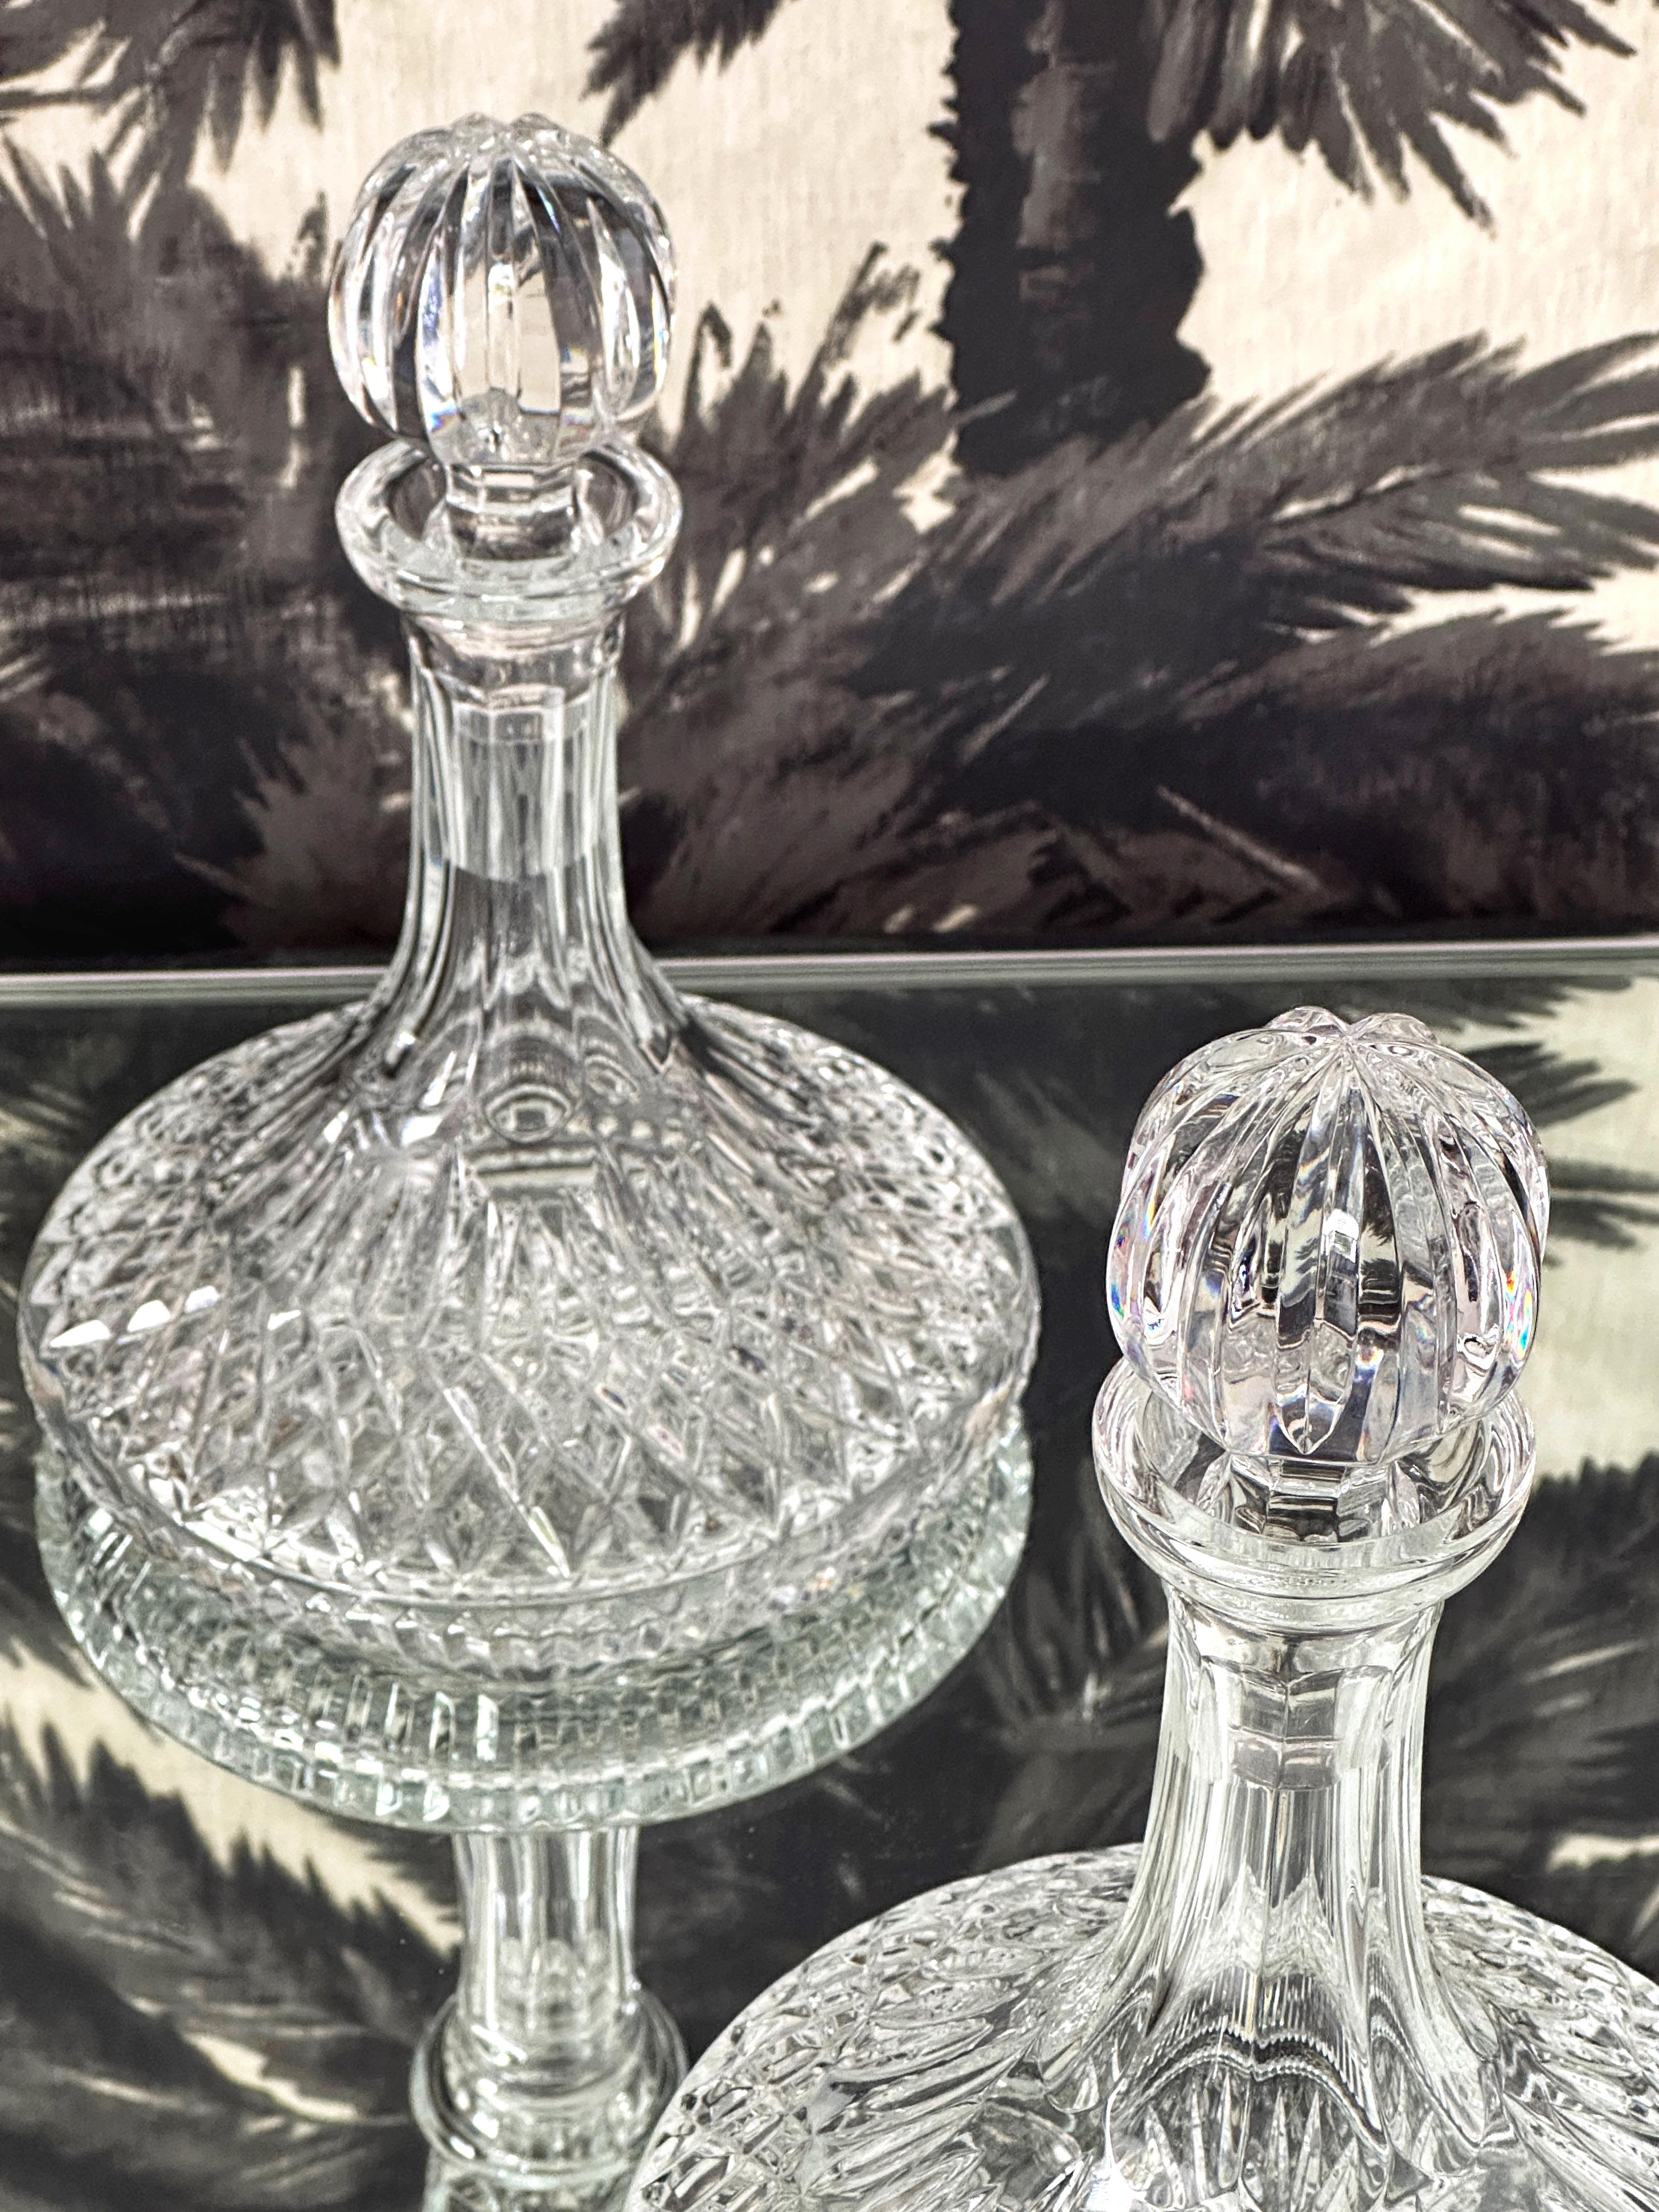 Irish Pair of Vintage Waterford Crystal Ships Decanters with Diamond Cuts, c. 1975